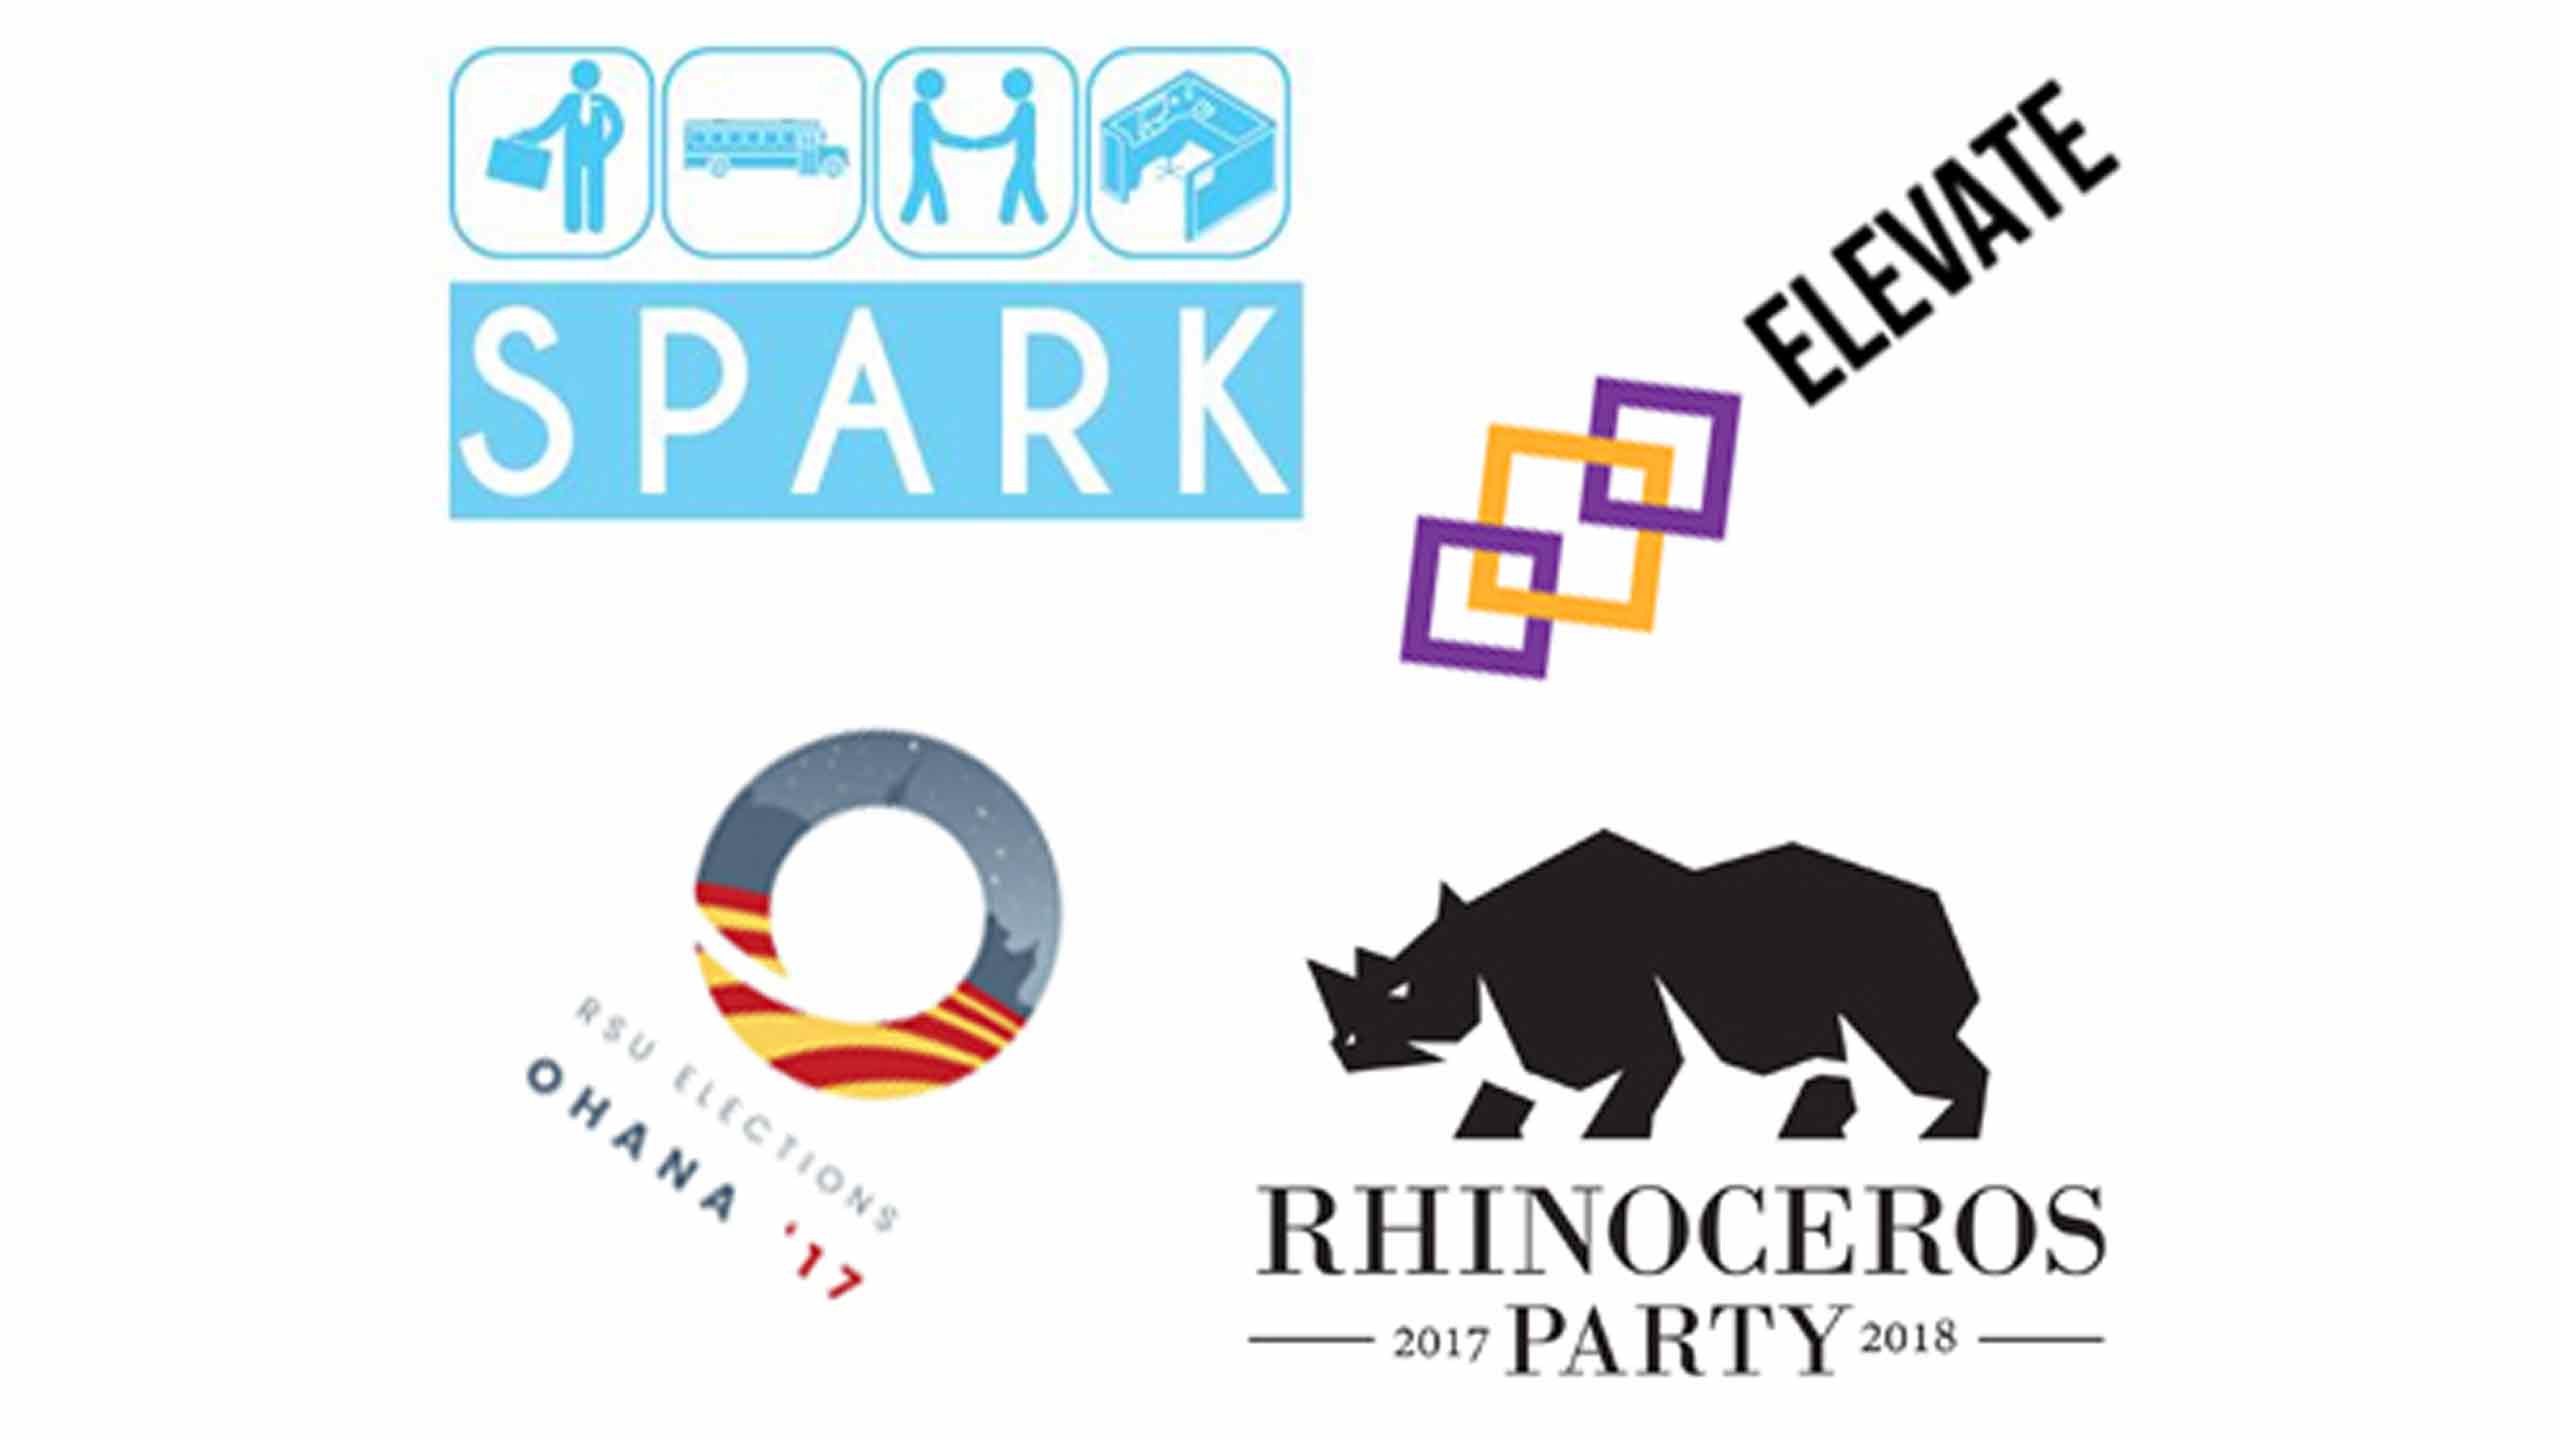 Clockwise from left: Spark, Elevate, Rhinoceros and Ohana. ILLUSTRATION: ANNIE ARNONE